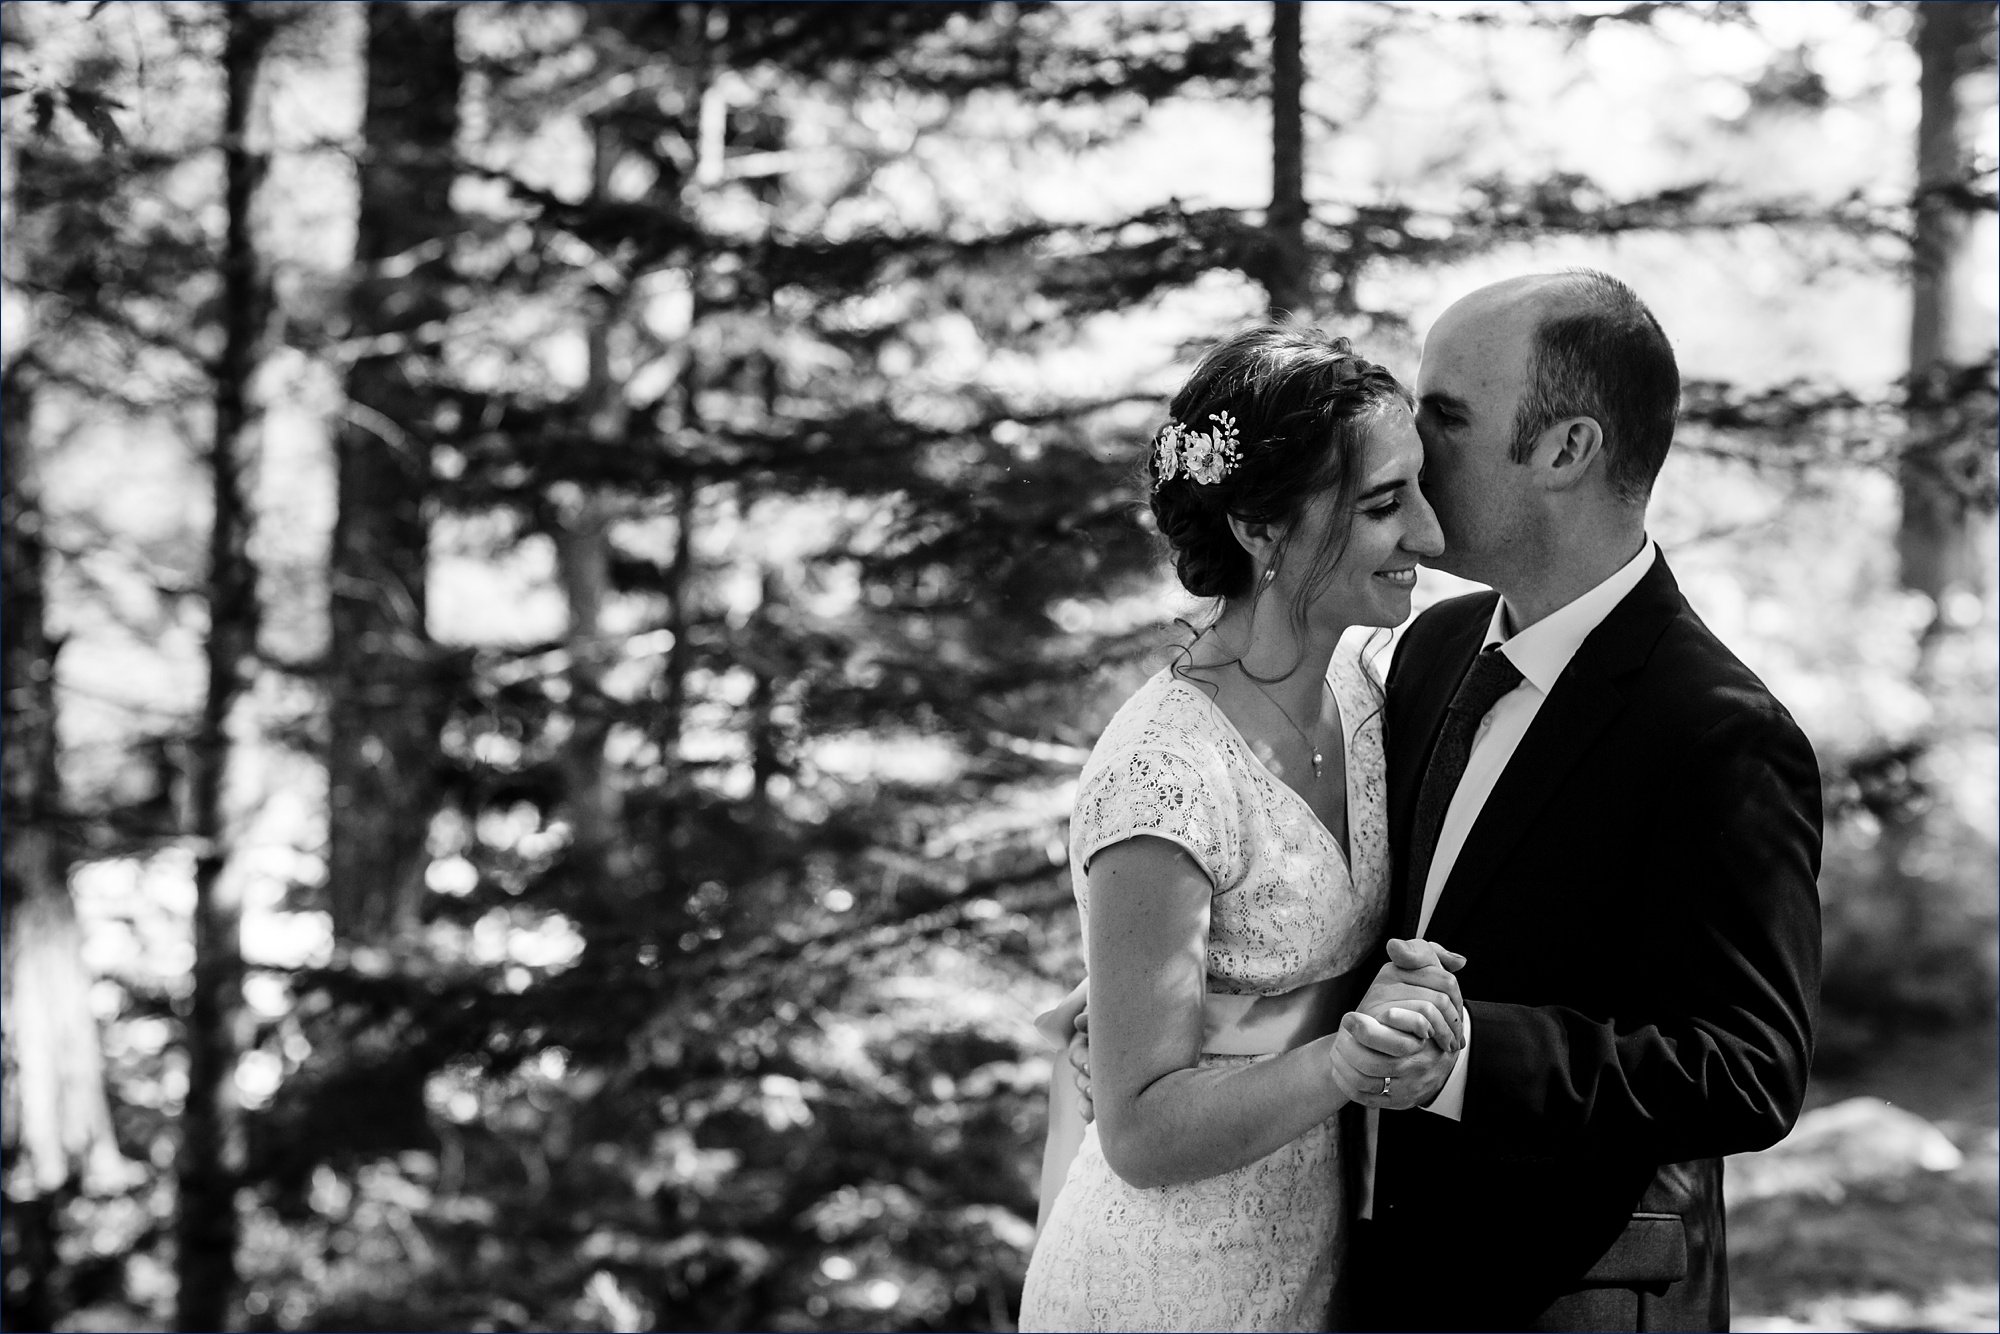 The couple dances in the woods after marrying one another in an intimate elopement in NH